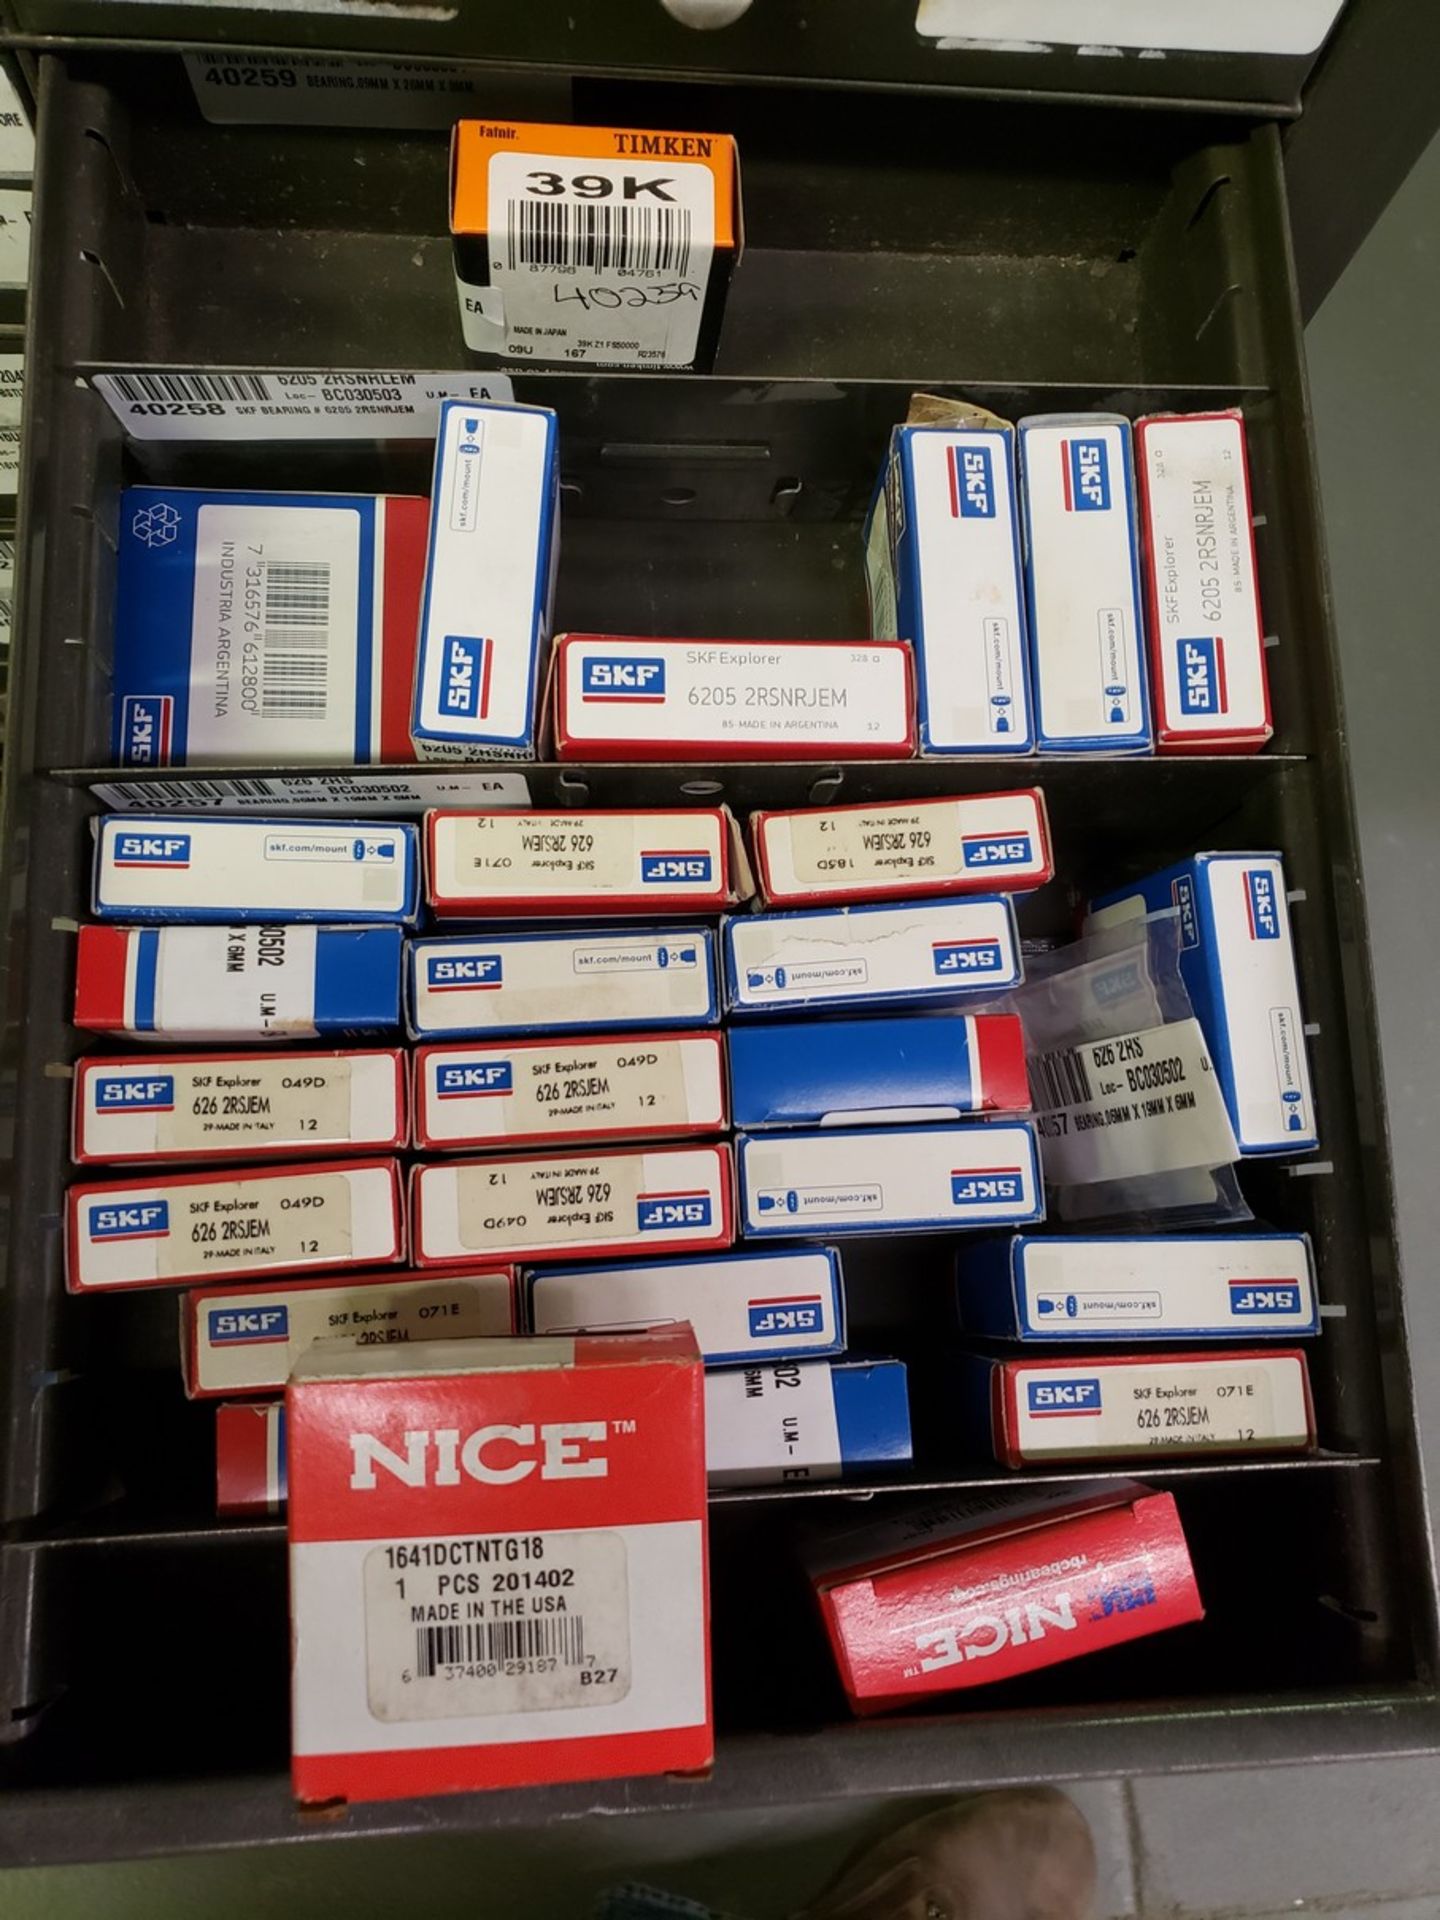 CABINET AND CONTENTS OF CABINET, BEARINGS, SKF, MRC, TIMKEN, RBC,KYK,PERCESIONBALL AND ROLLER - Image 21 of 28